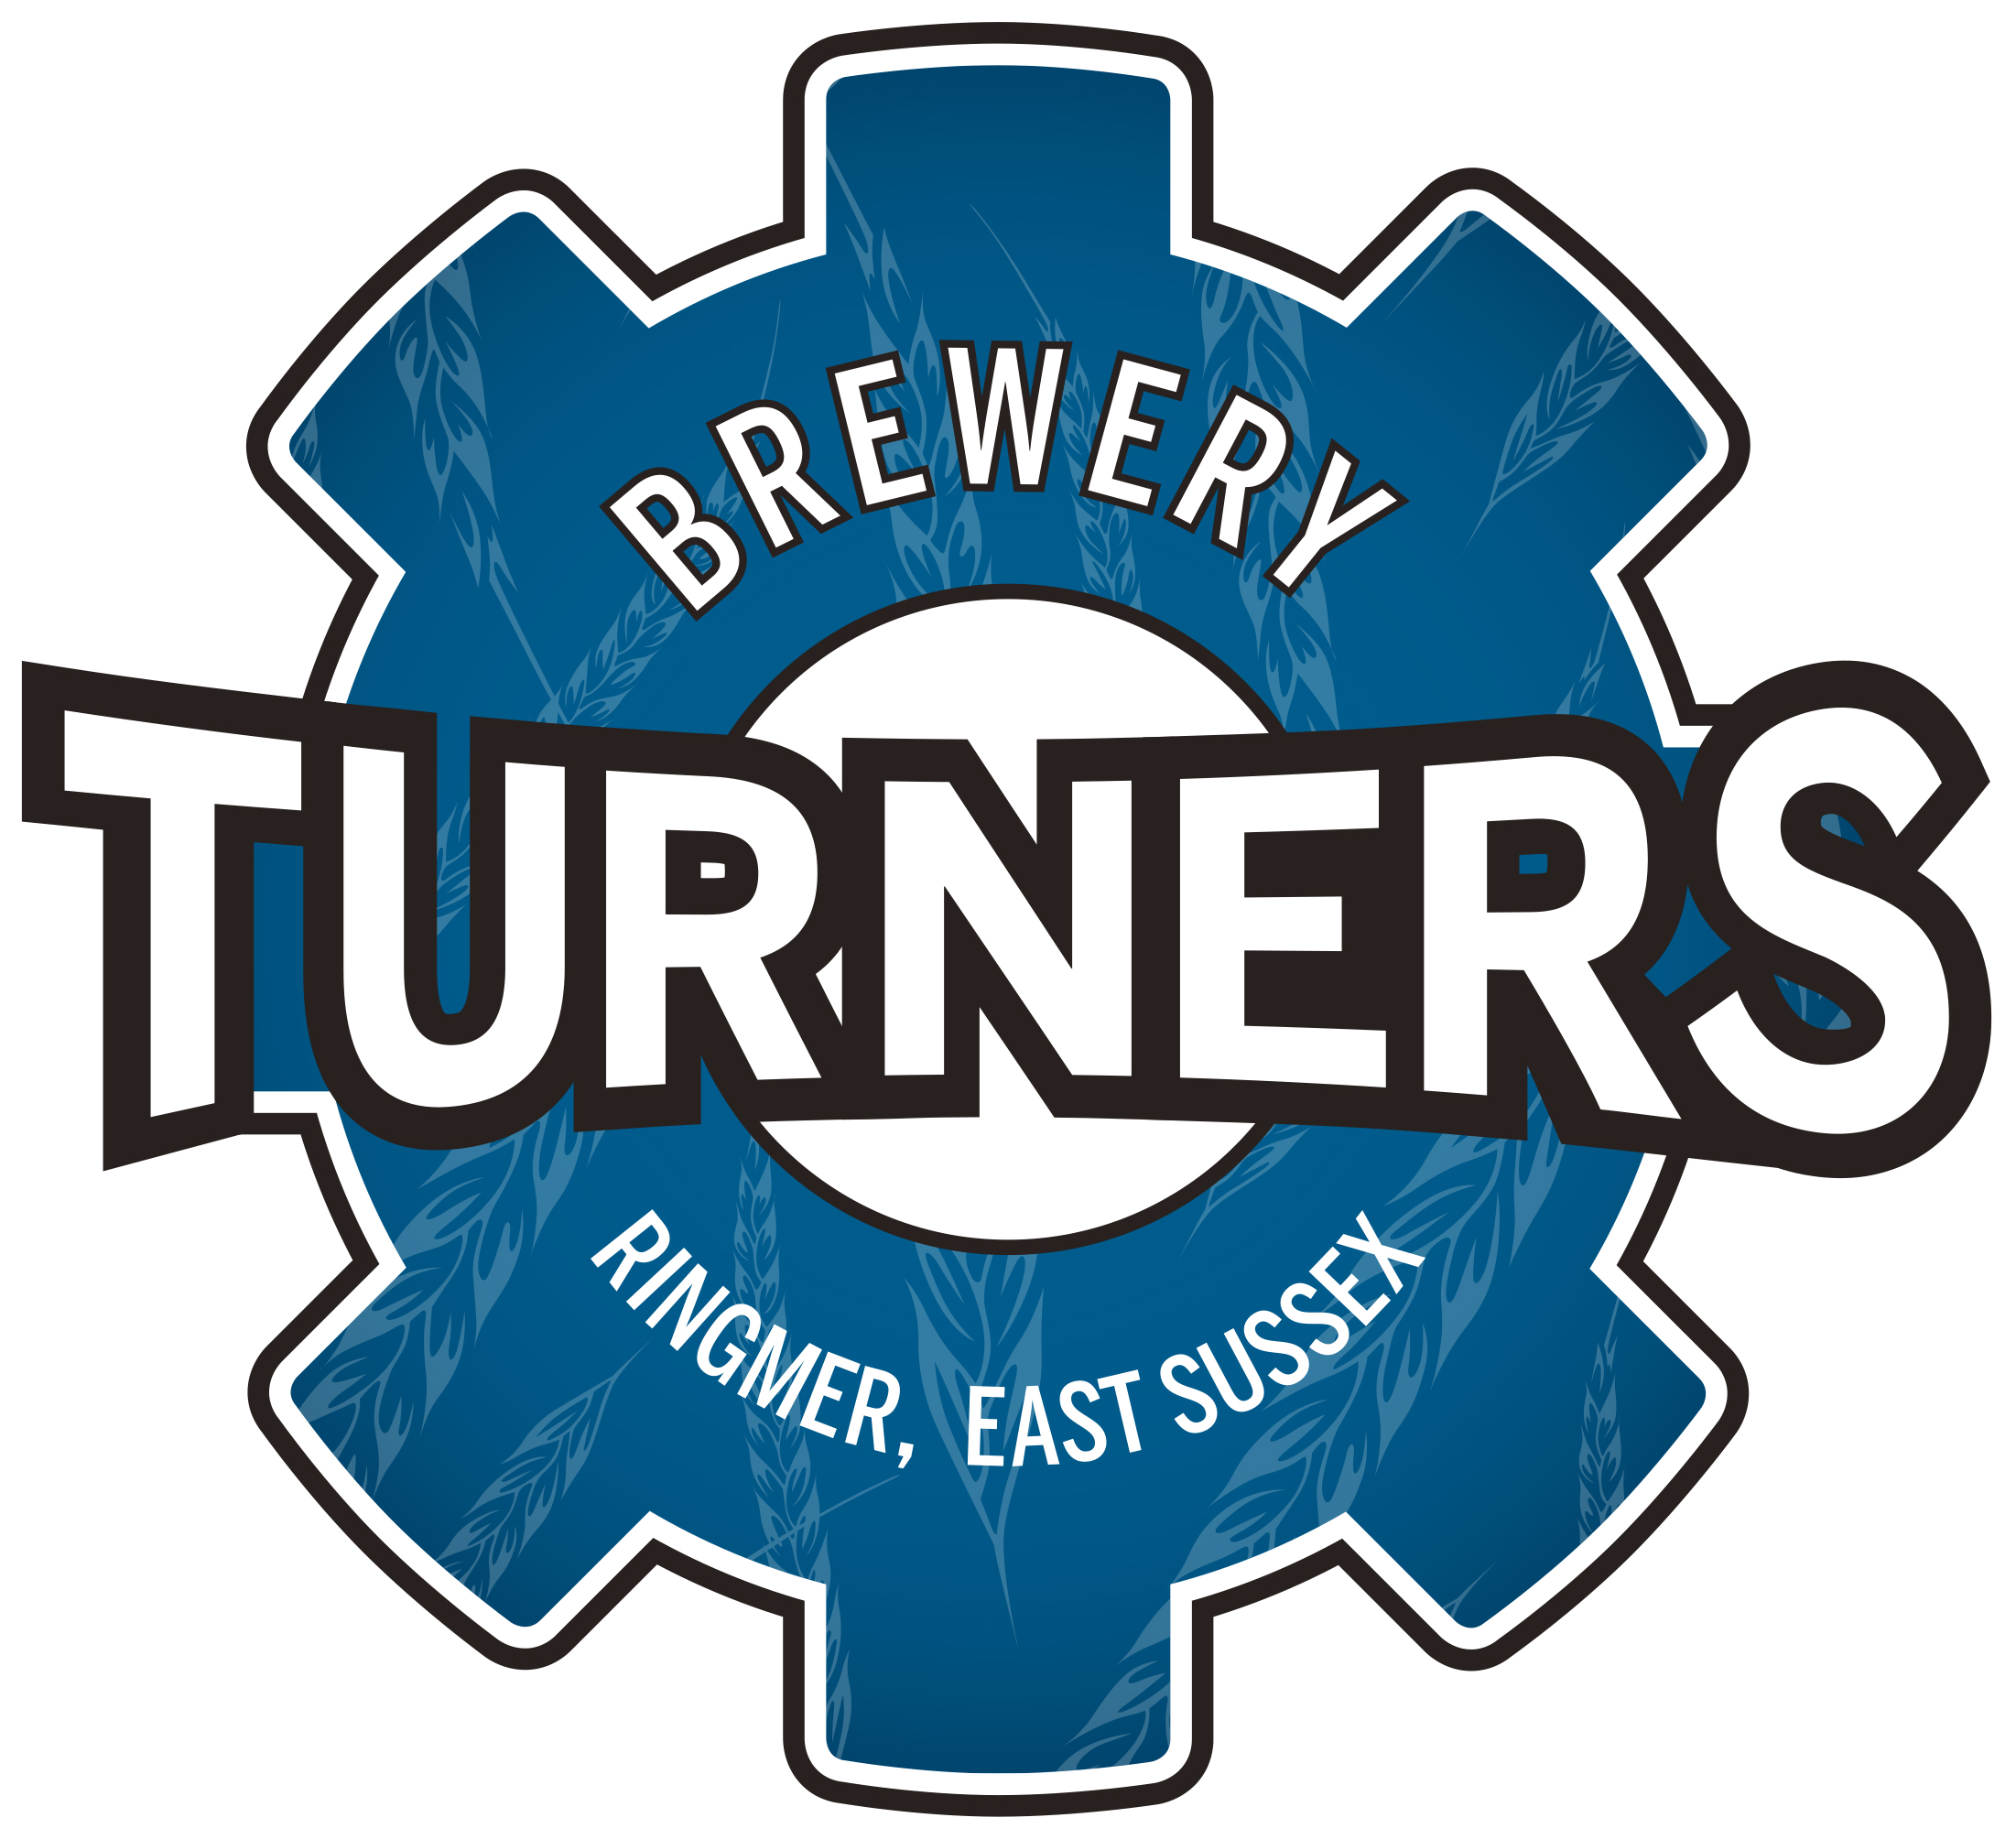 Turners - A Brewery